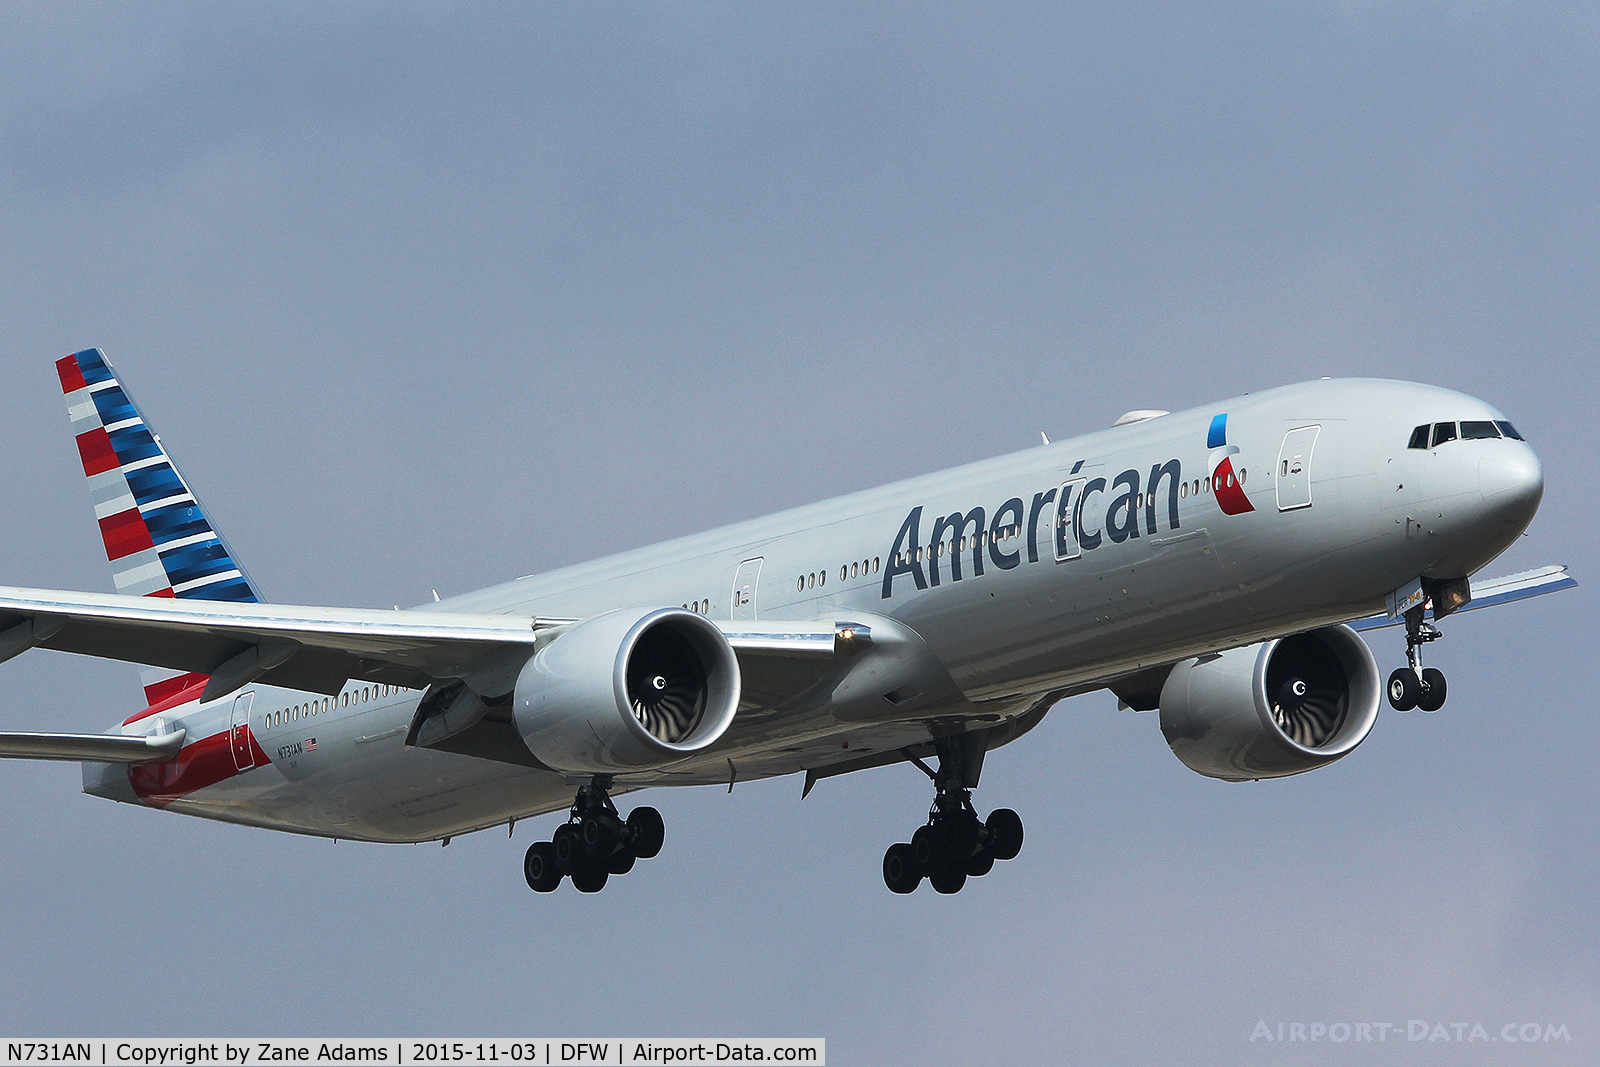 N731AN, 2014 Boeing 777-323/ER C/N 33523, American Airlines arriving at DFW Airport